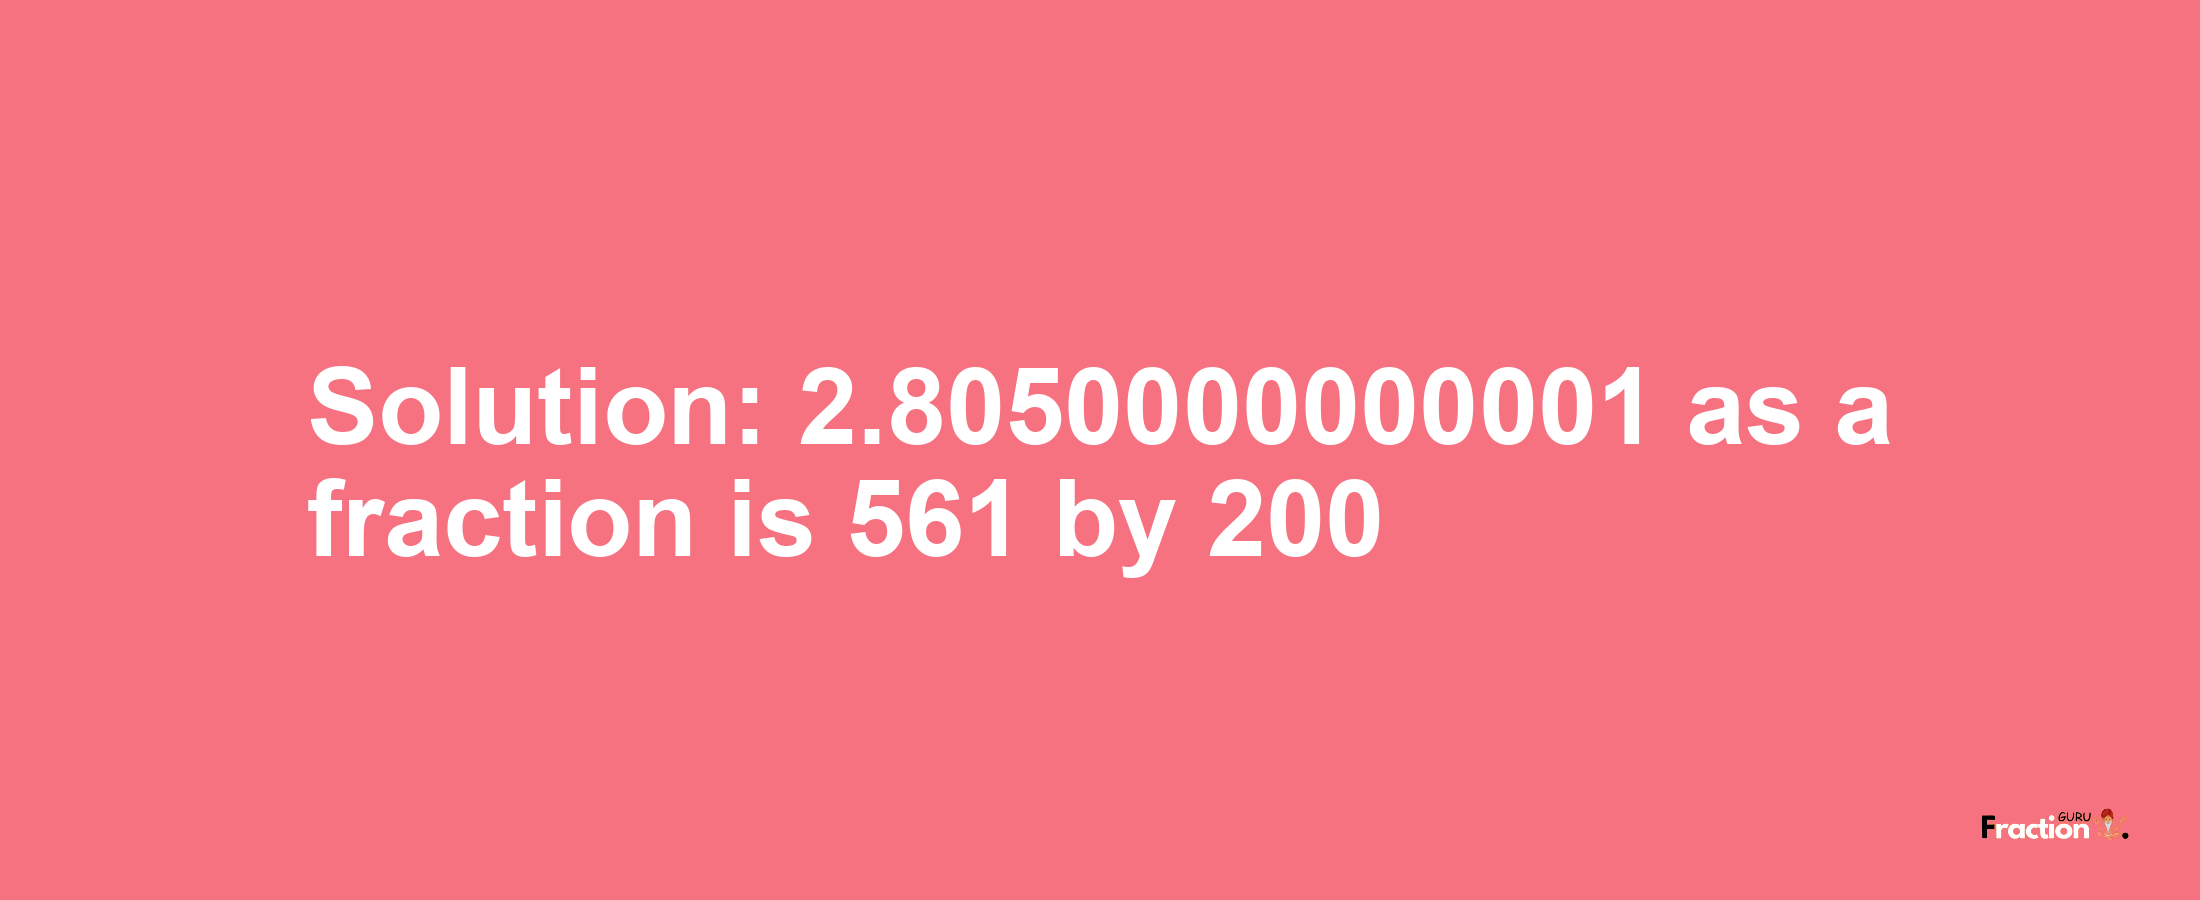 Solution:2.8050000000001 as a fraction is 561/200